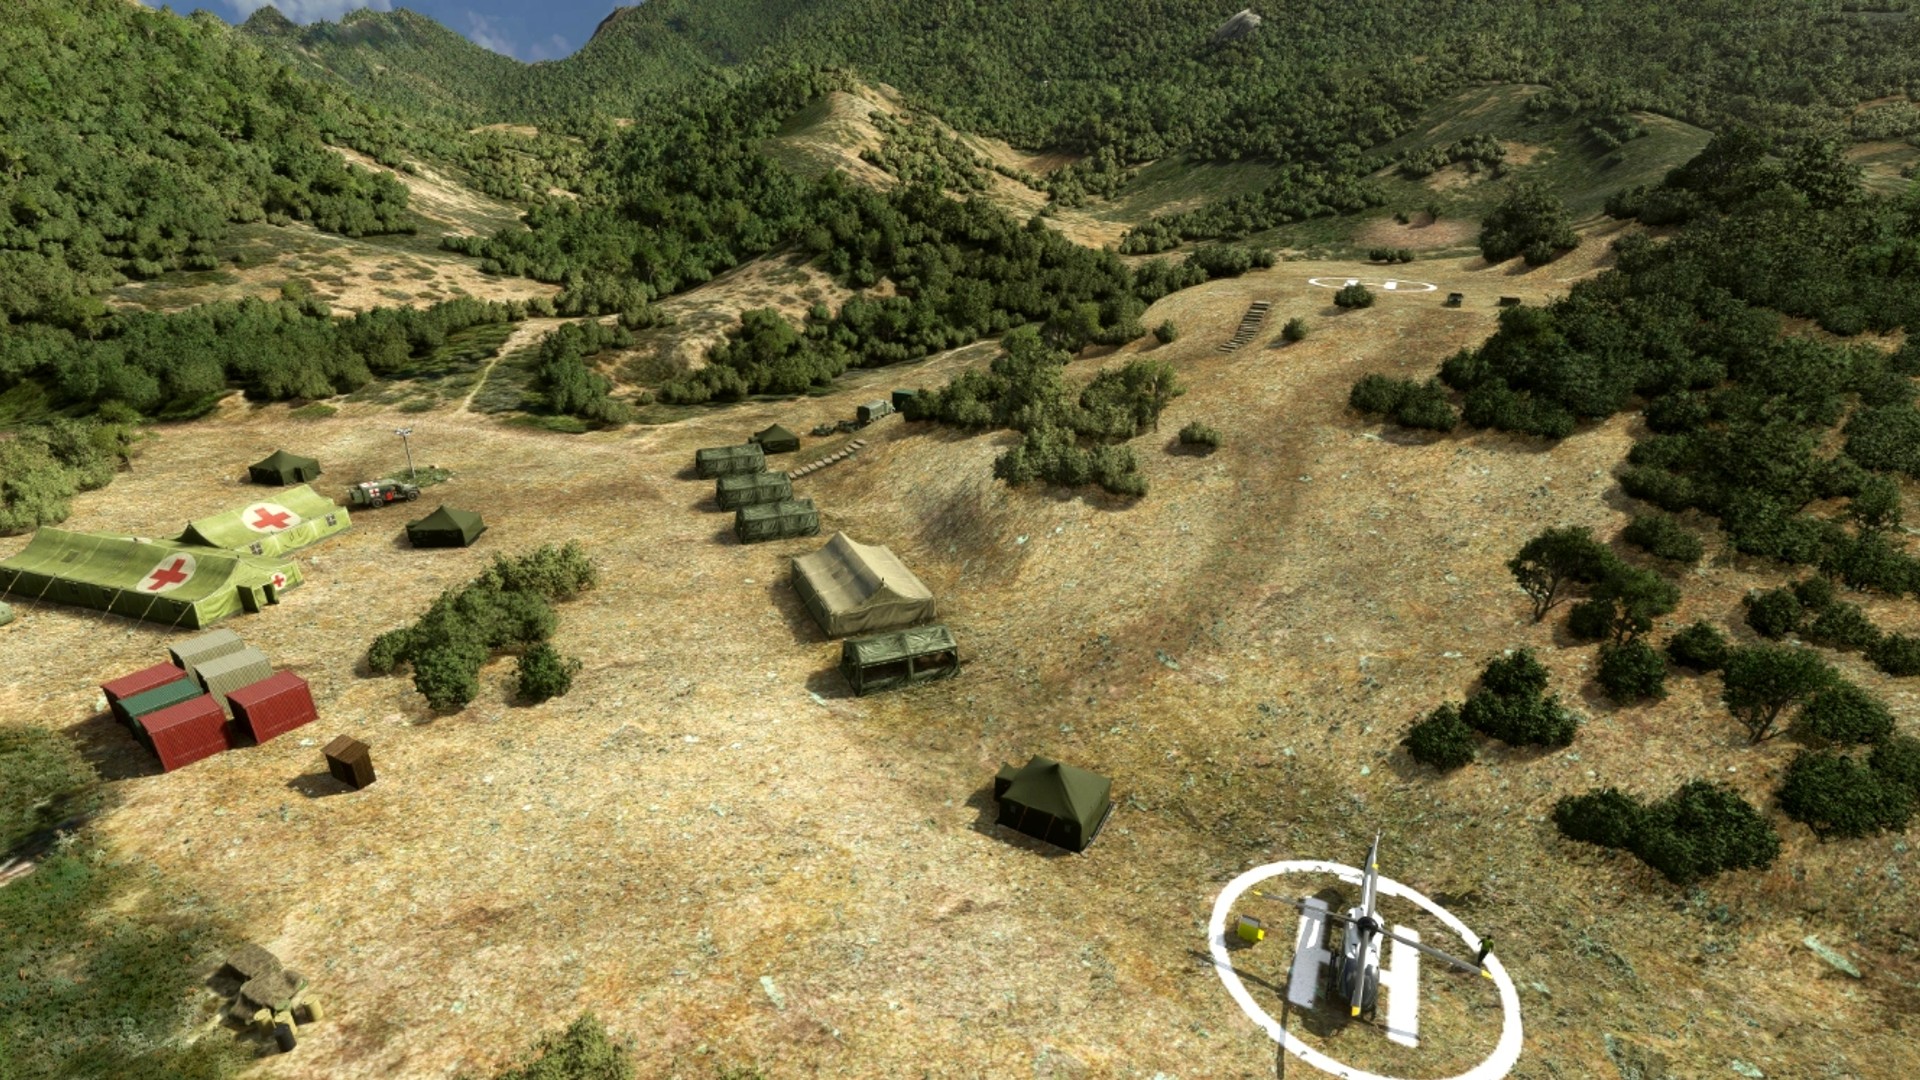 This free Microsoft Flight Simulator mod adds the set from TV’s M*A*S*H